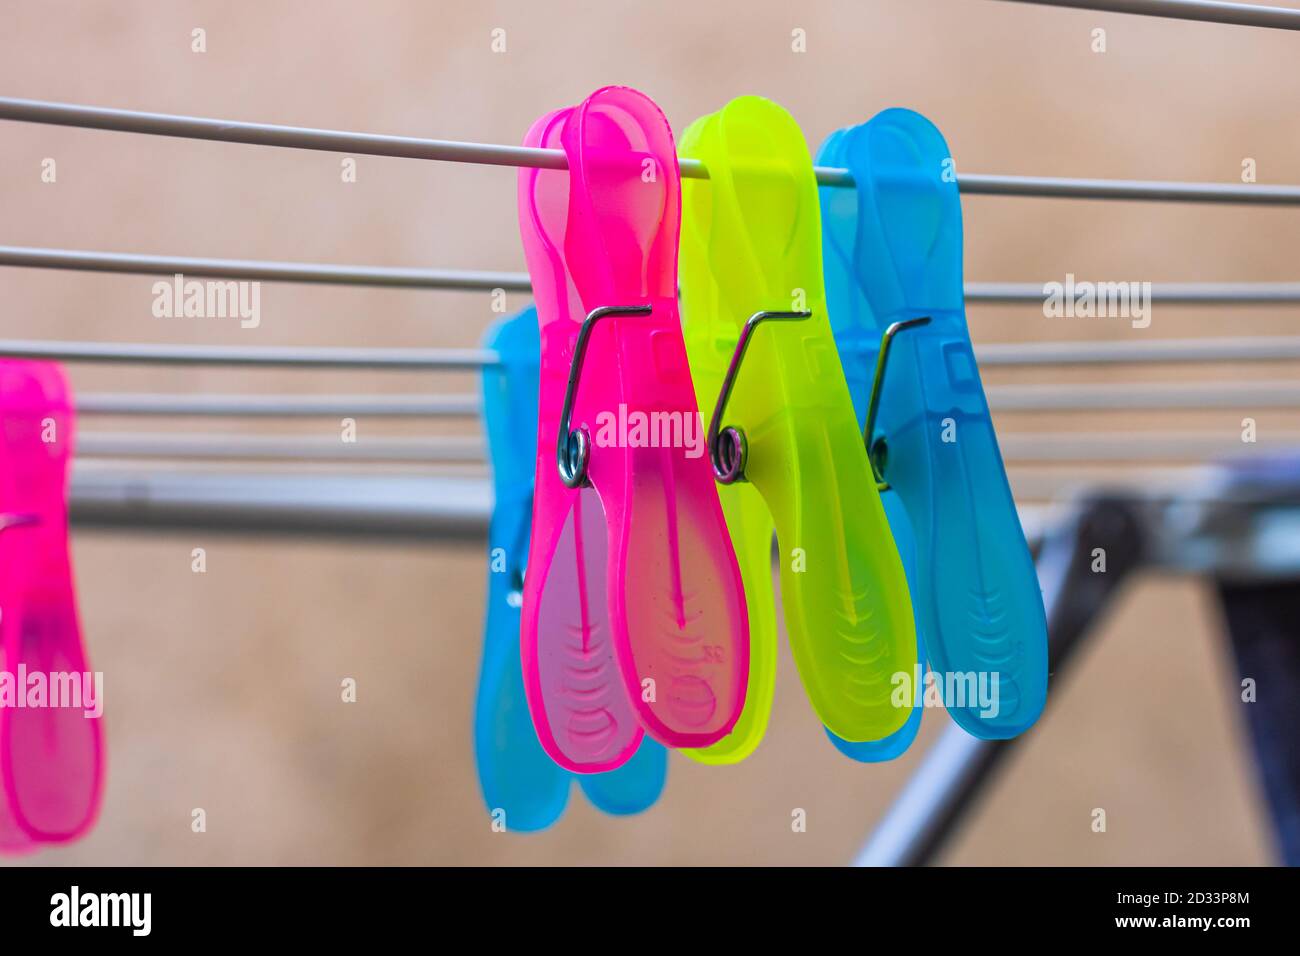 Colorful plastic clothes pegs on empty metal clothes dryer. Stock Photo